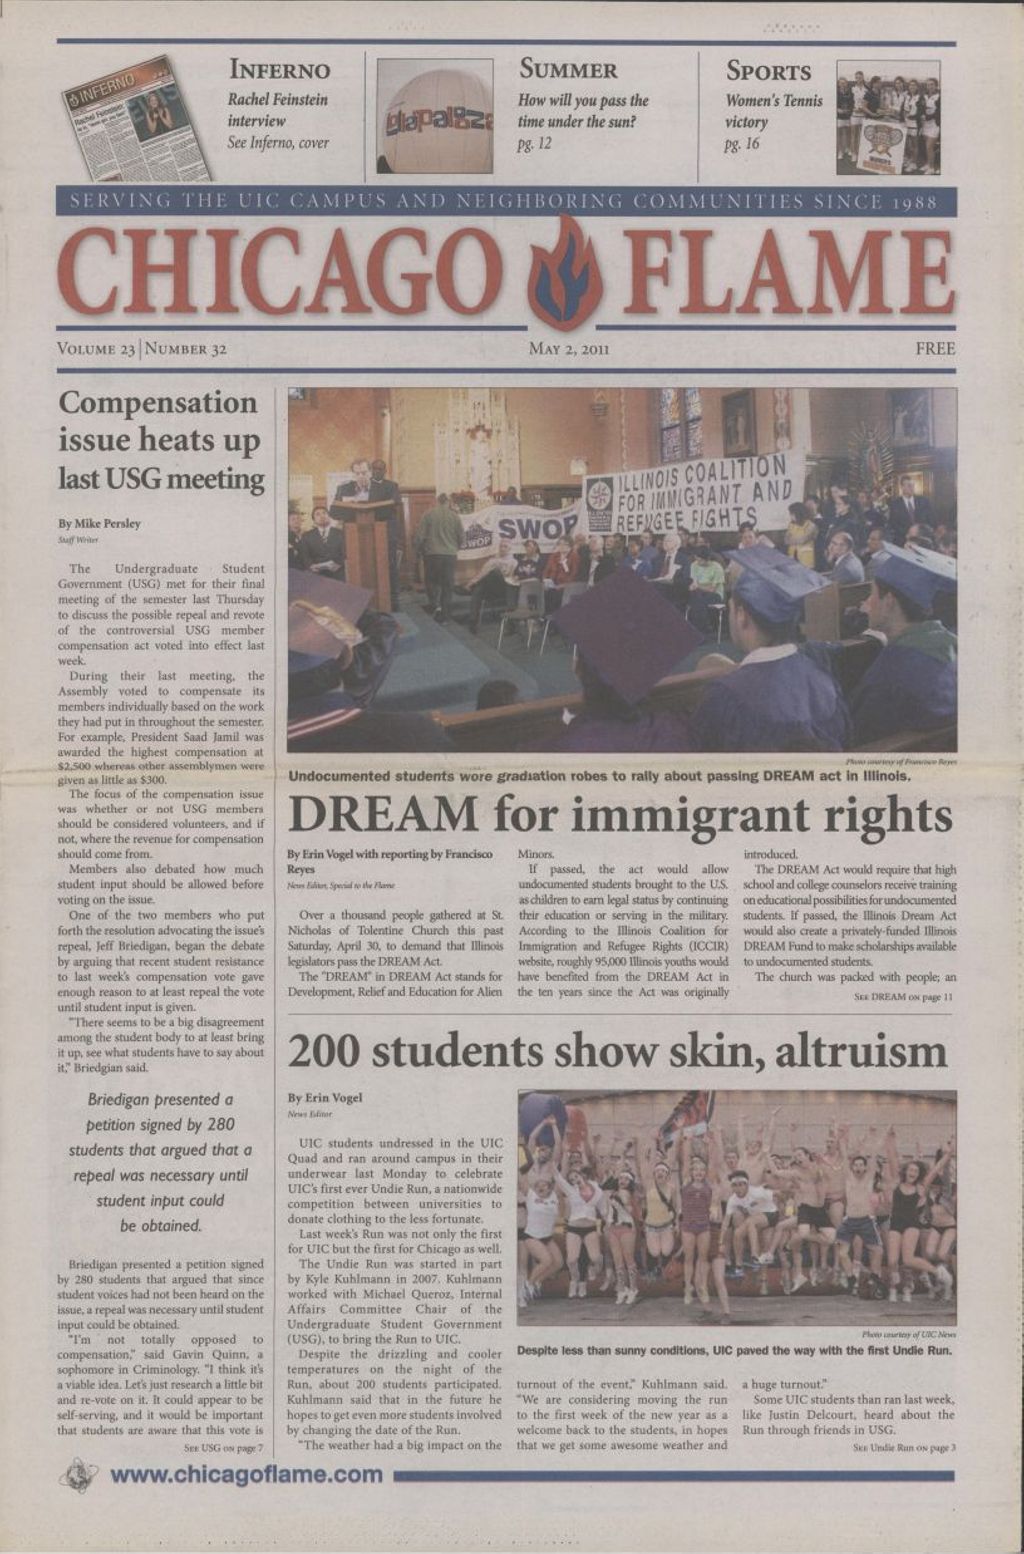 Miniature of Chicago Flame (May 2, 2011)